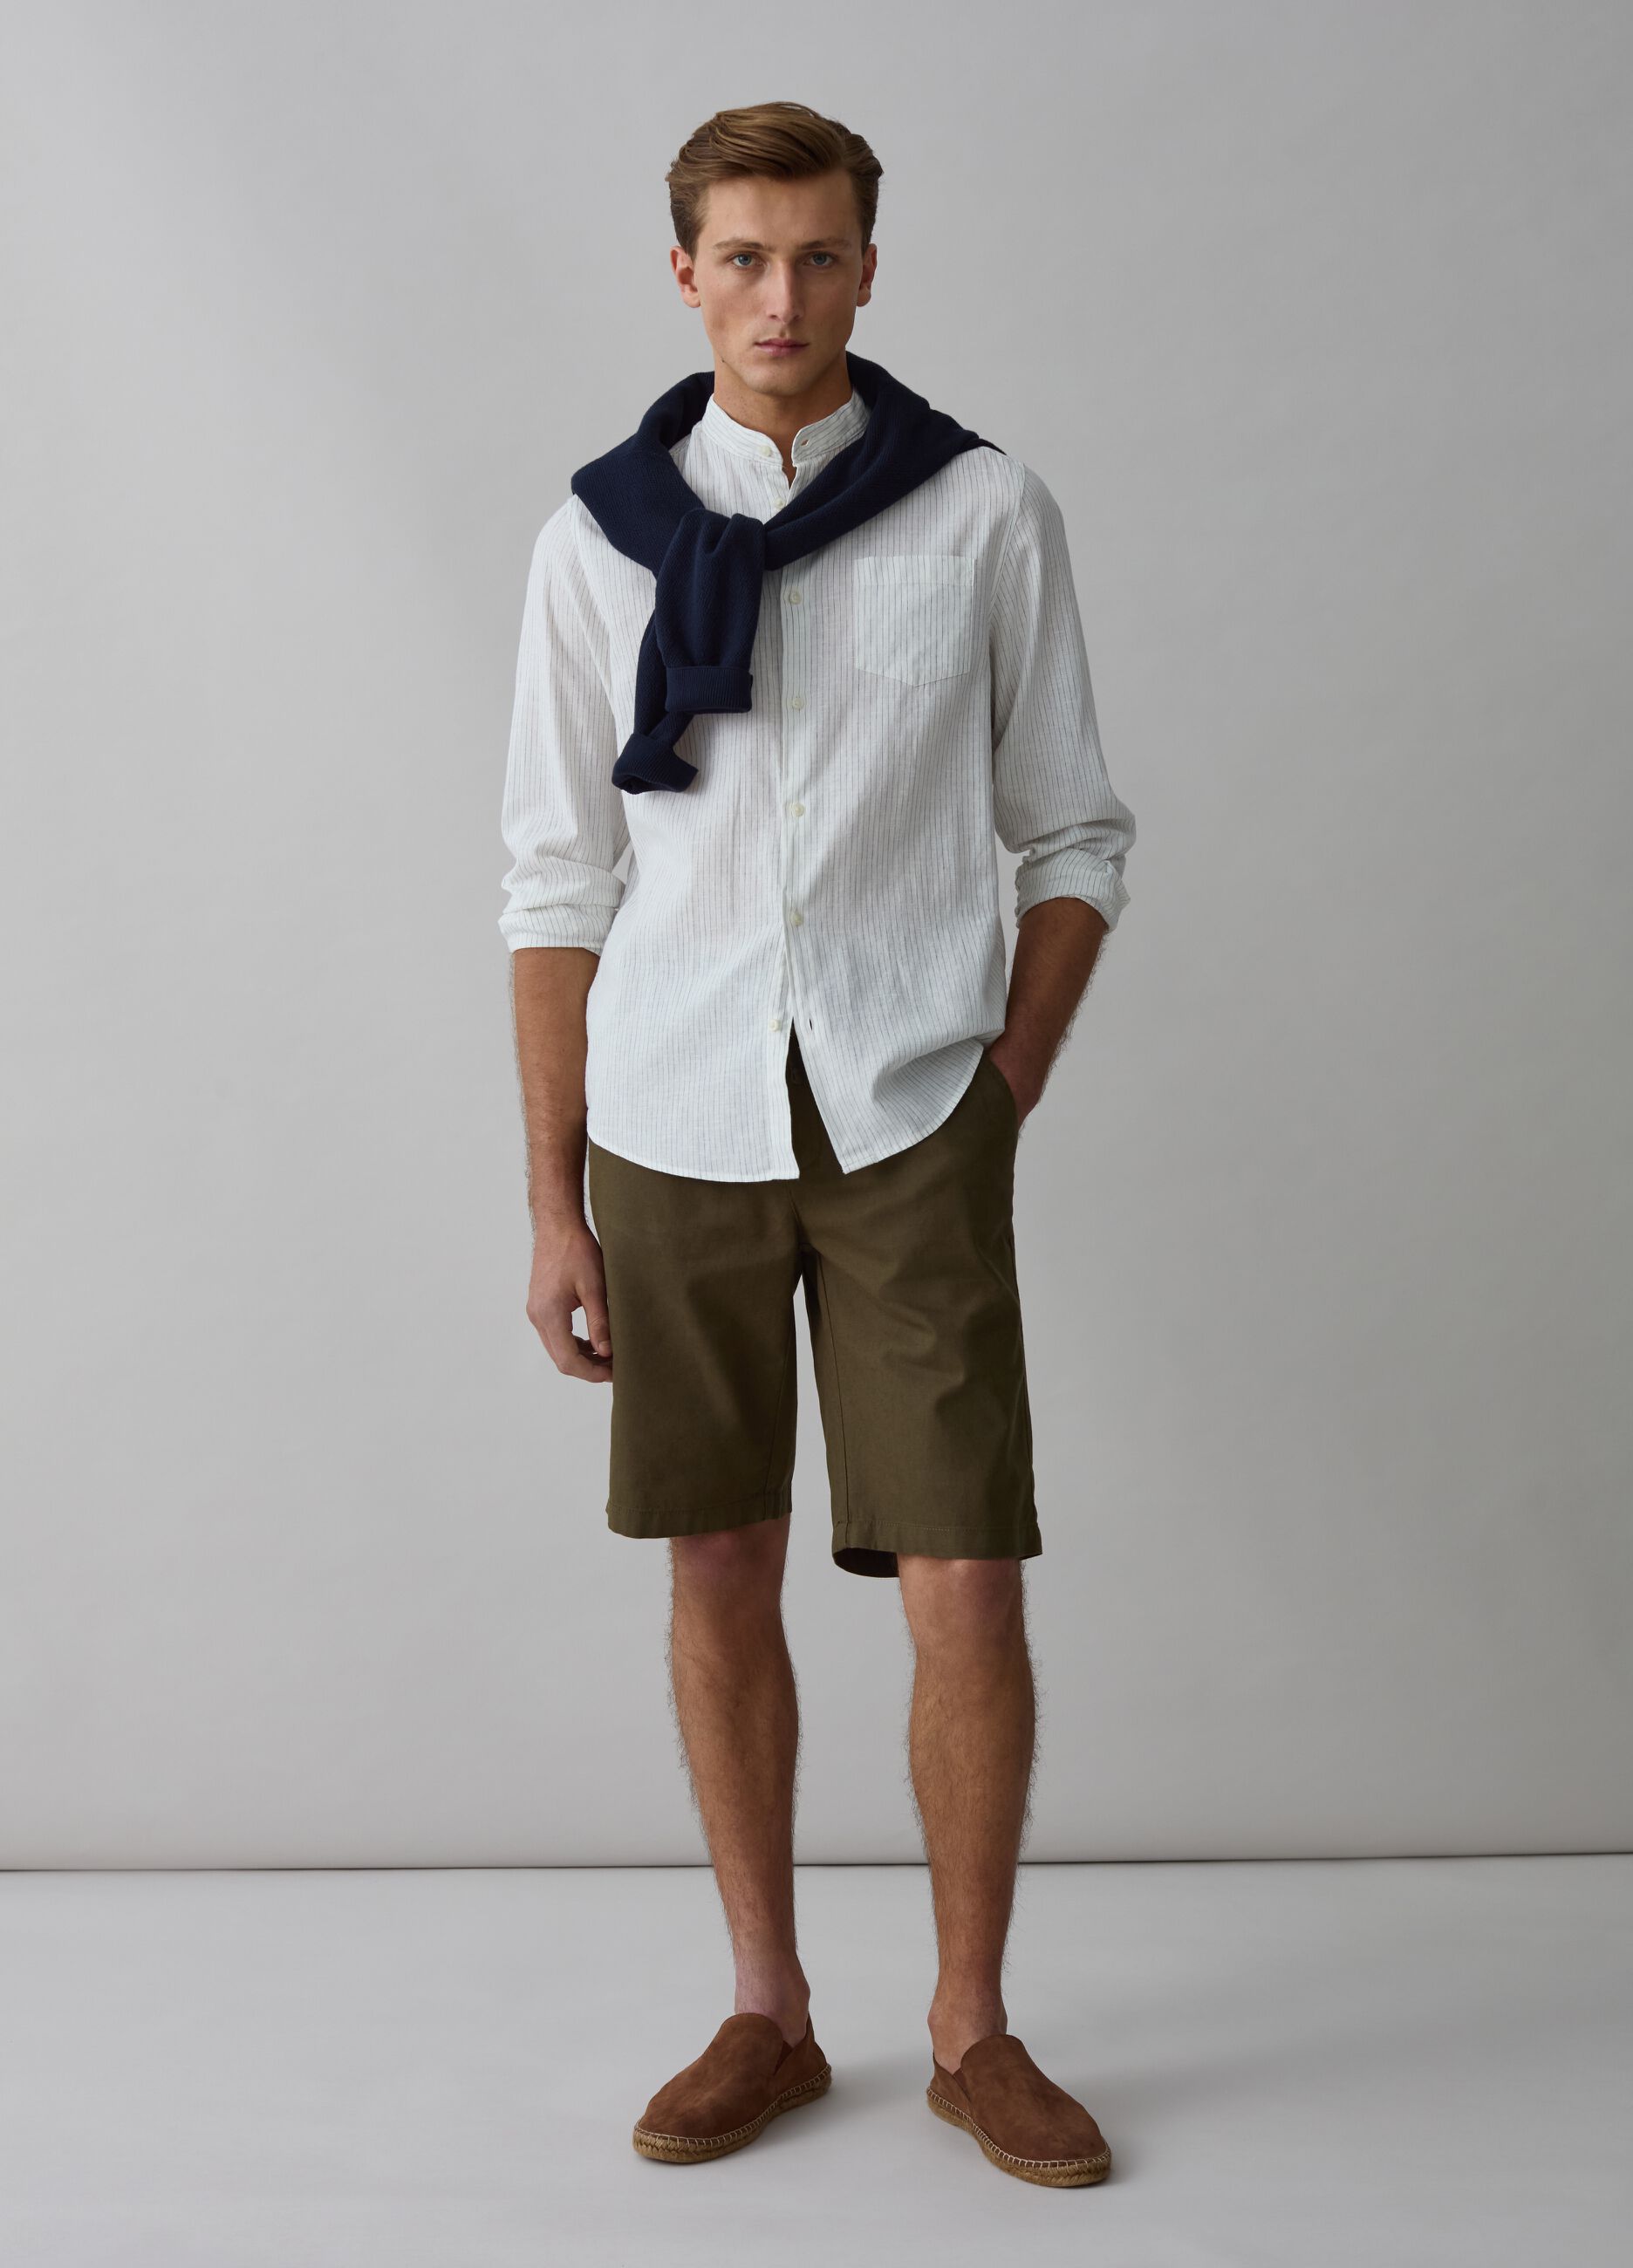 Chino Bermuda shorts in linen and cotton with drawstring